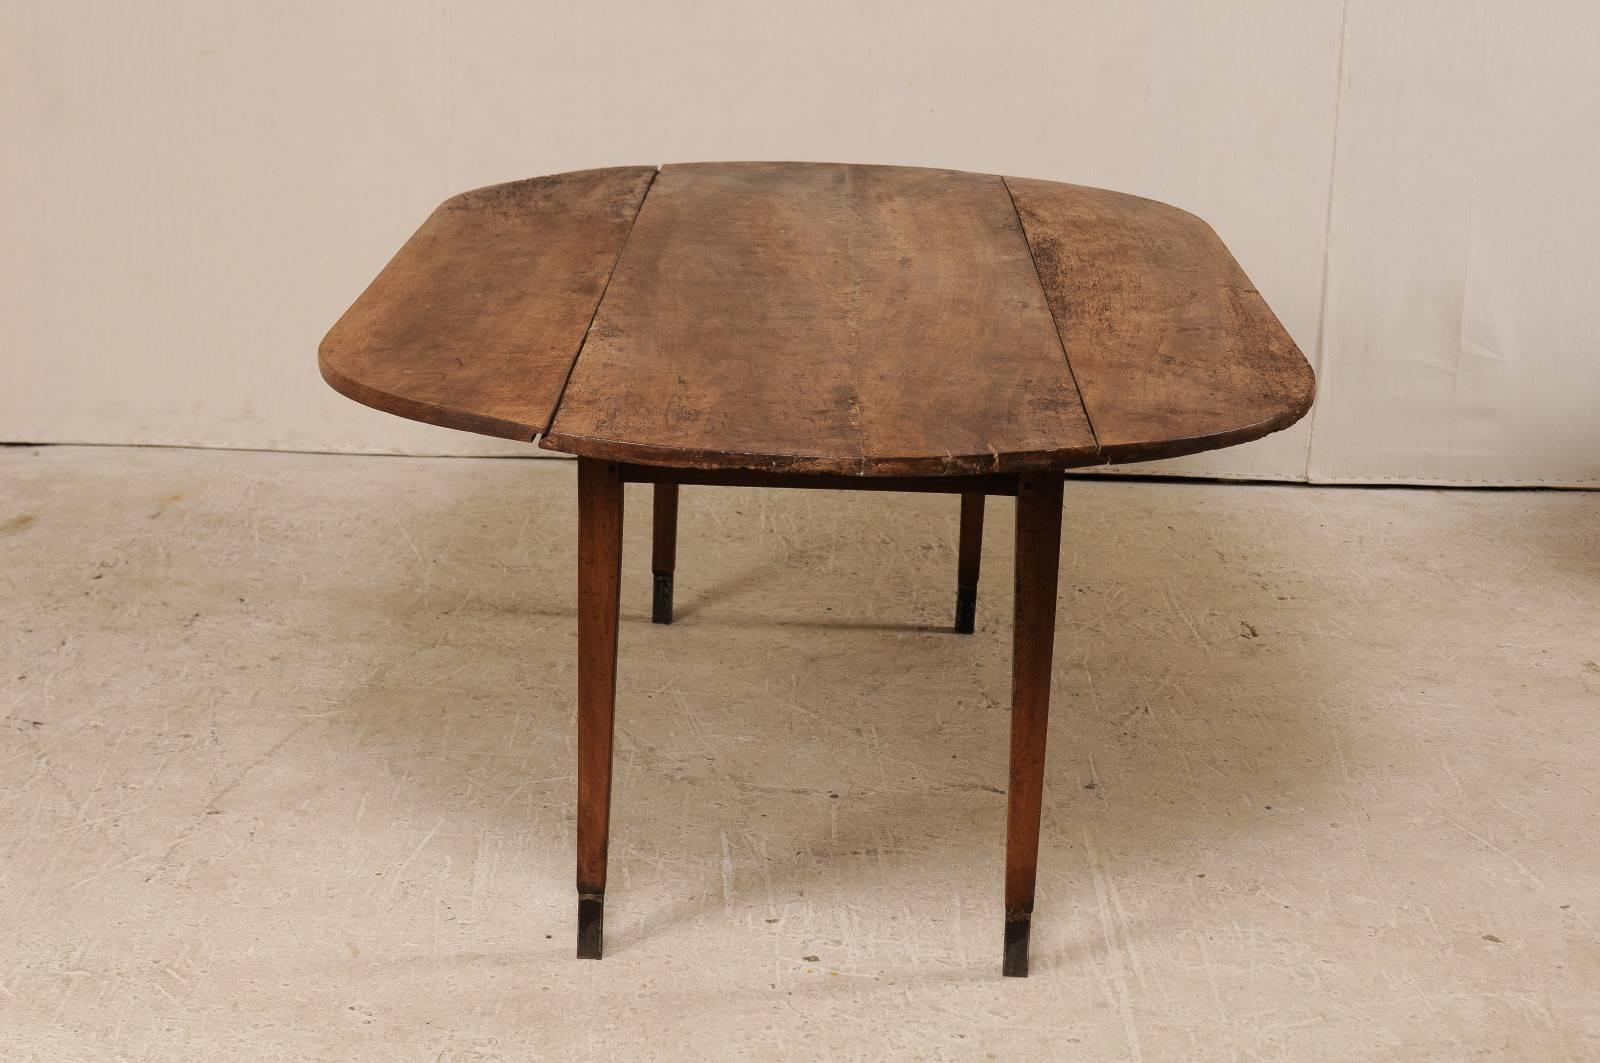 French Early 19th Century Drop-Leaf Dining Room Table with Elegant Oval Shape 3